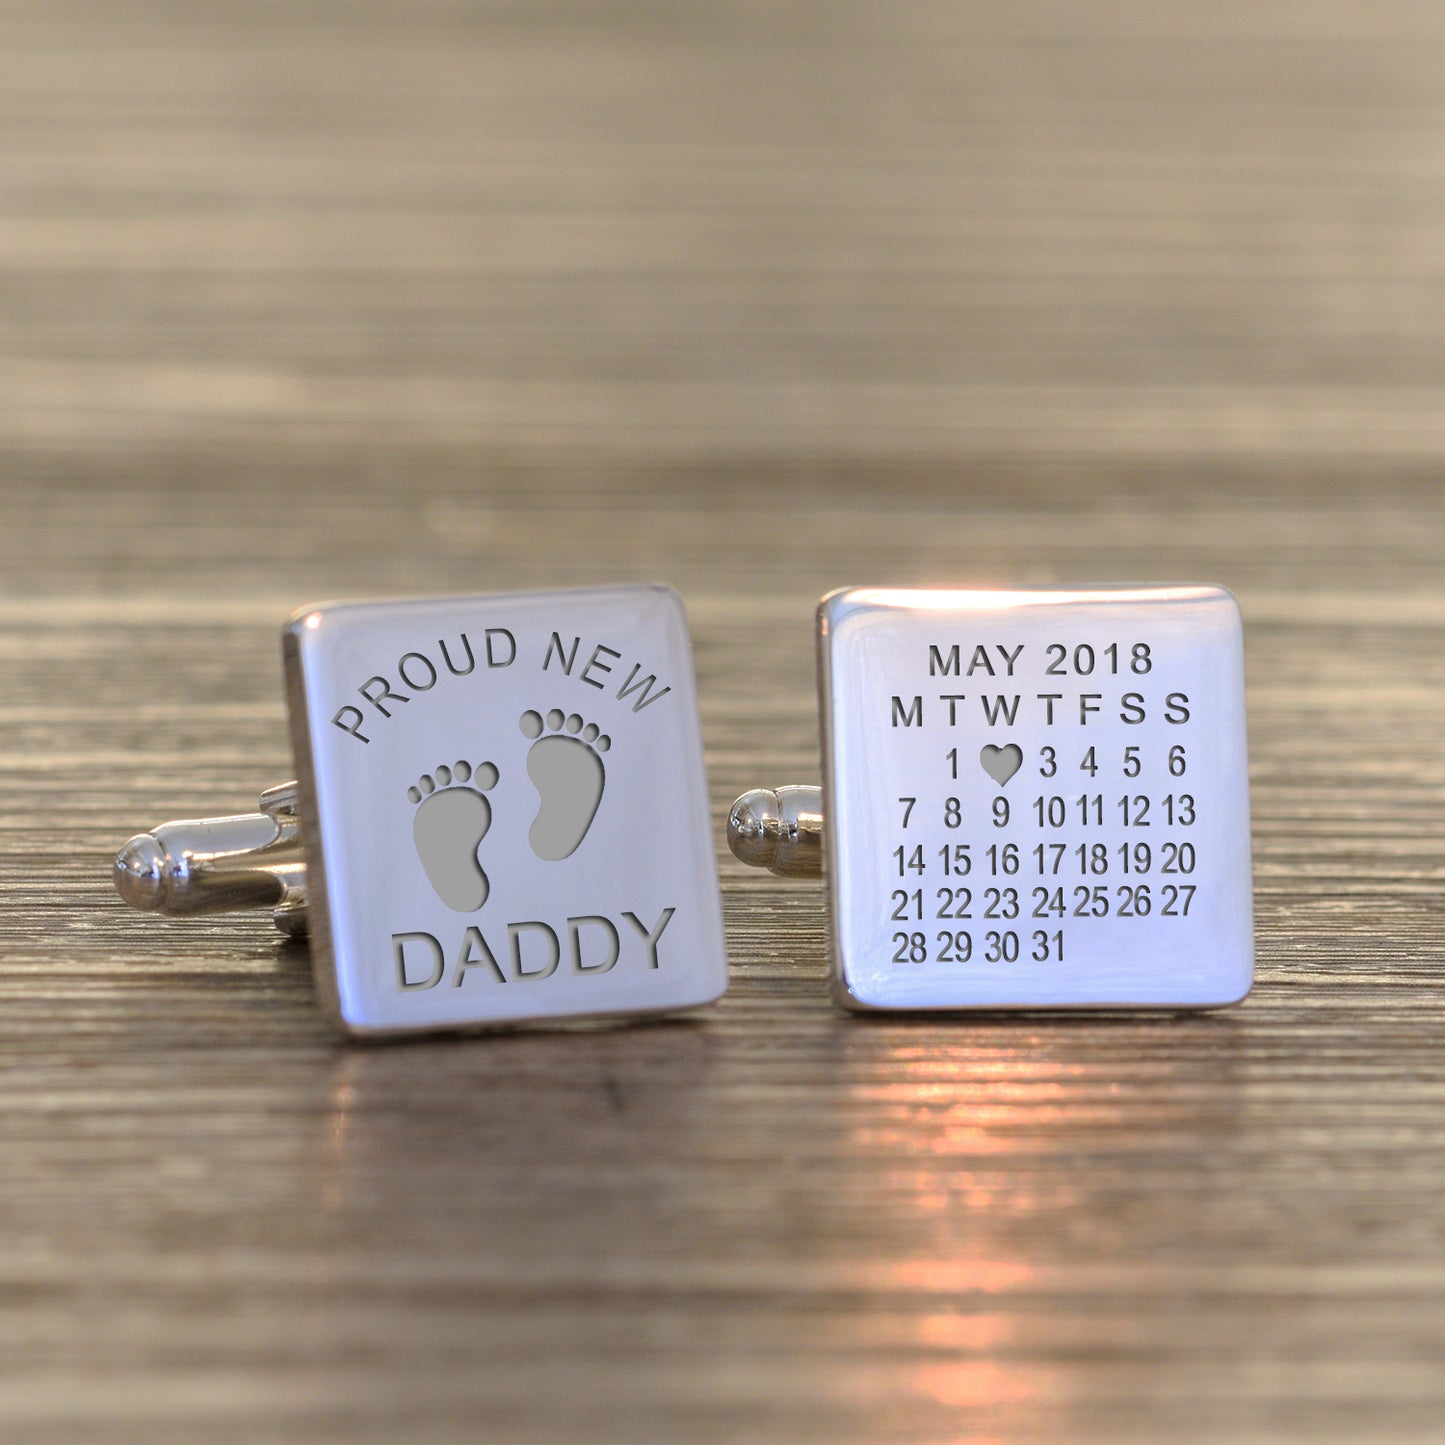 Personalised Proud New Daddy Cufflinks - PCS Cufflinks & Gifts